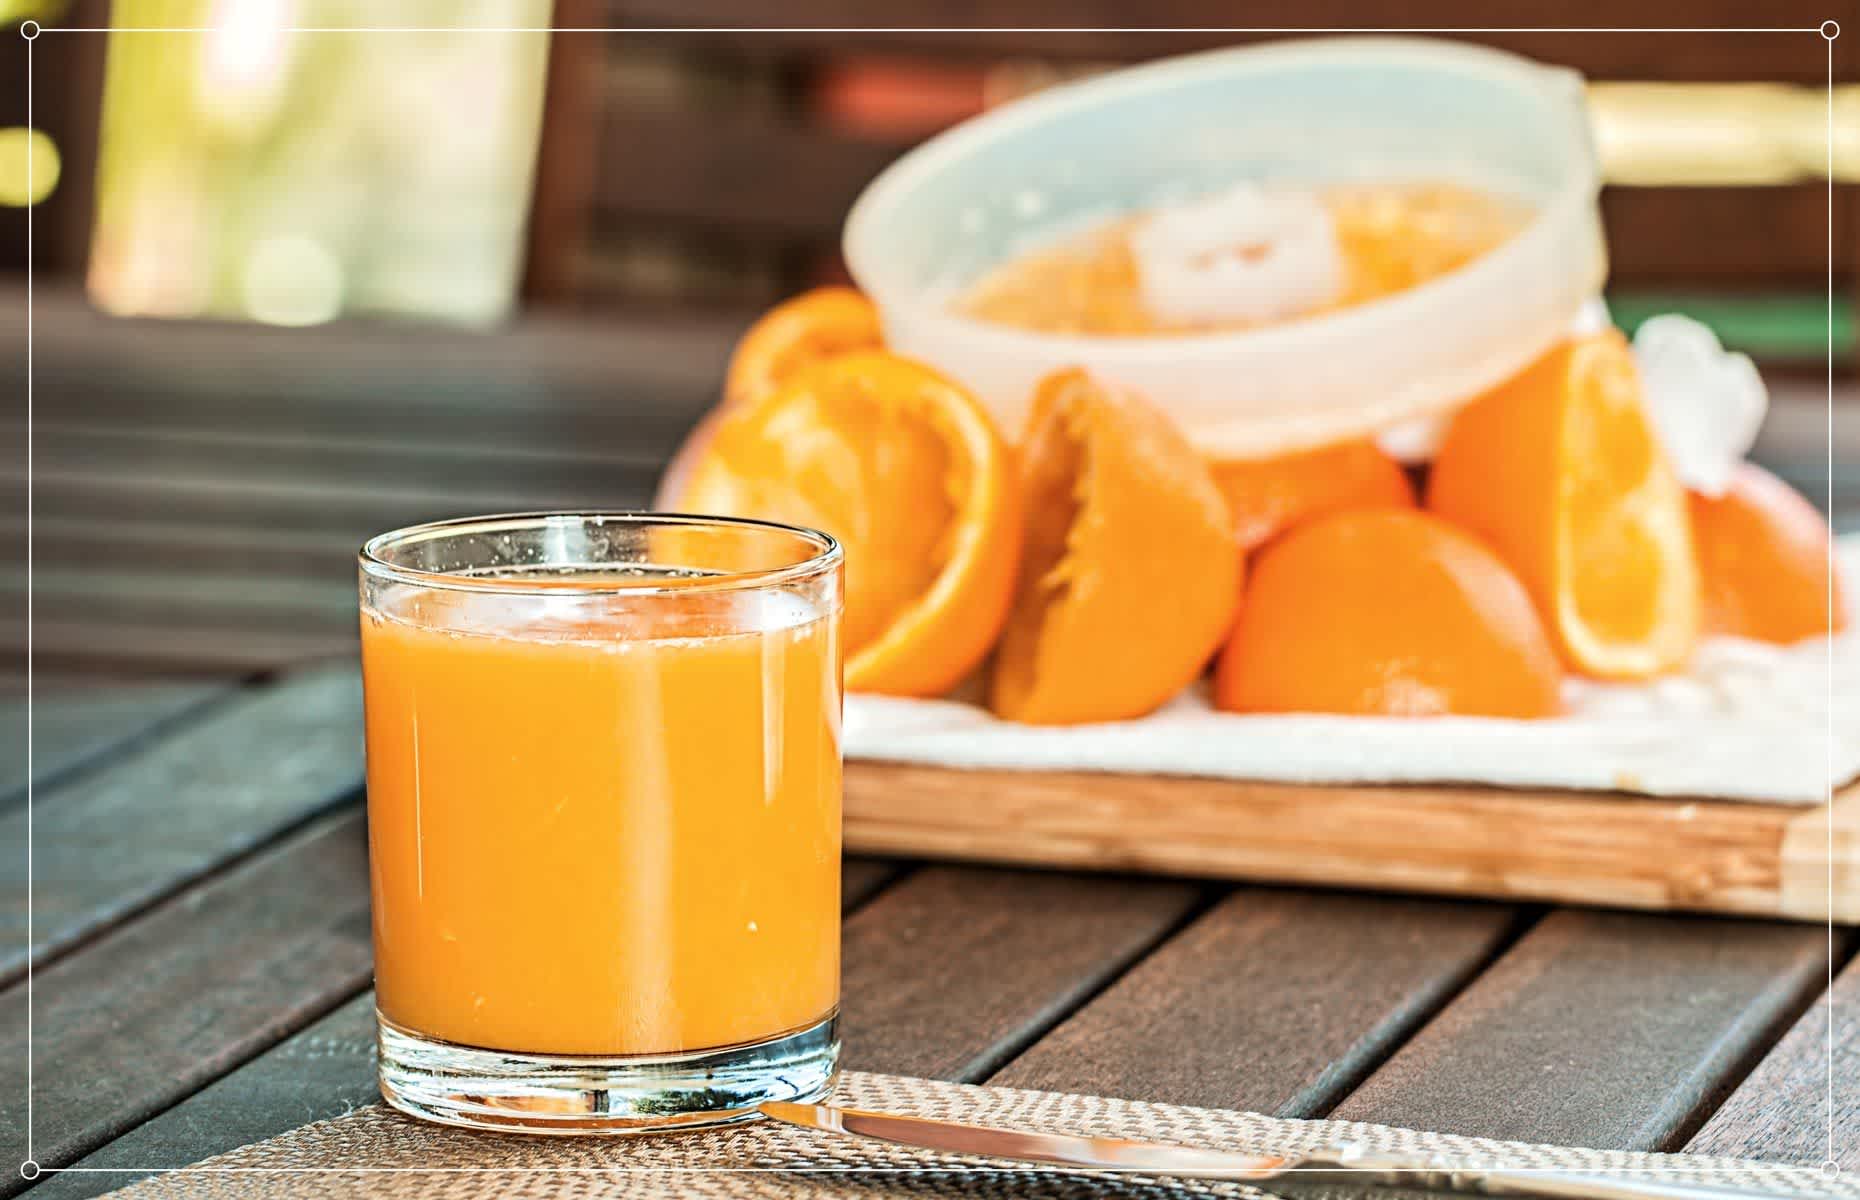 Glass of orange juice as an example of a food that may cause fructose intolerance symptoms